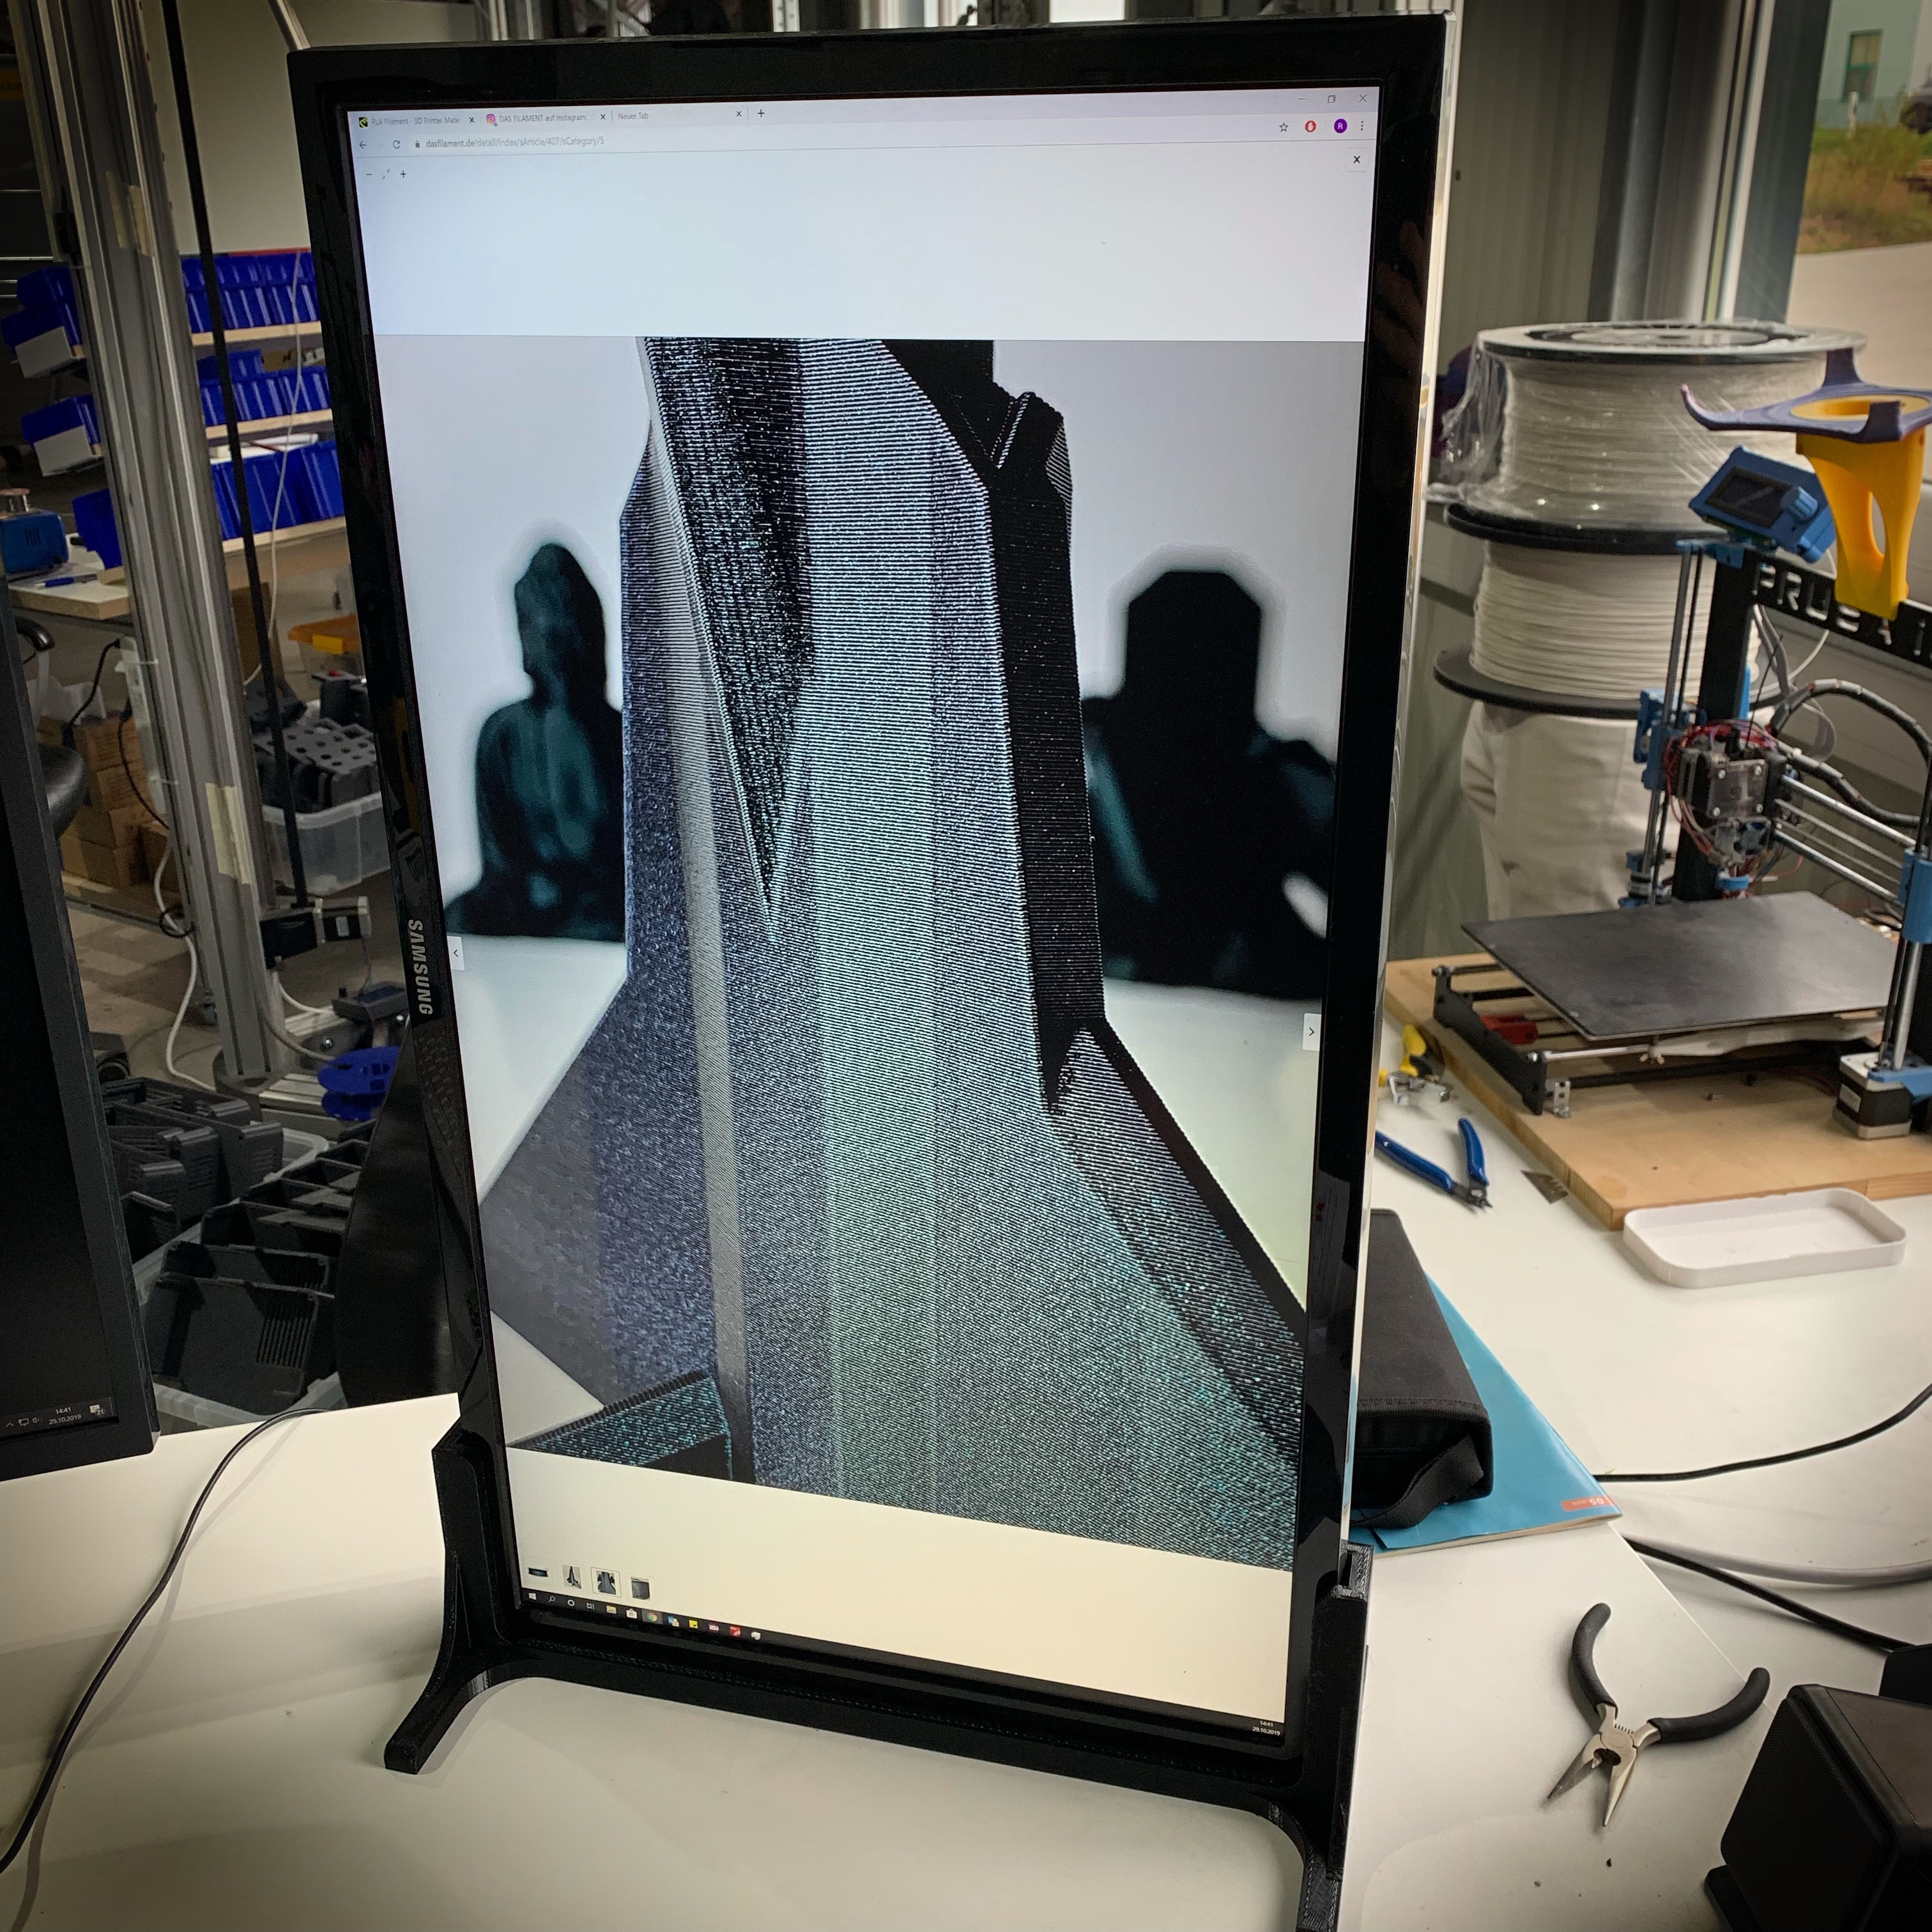 Simple vertical monitor mount / stand ( for 28" Samsung U28E59D monitor )